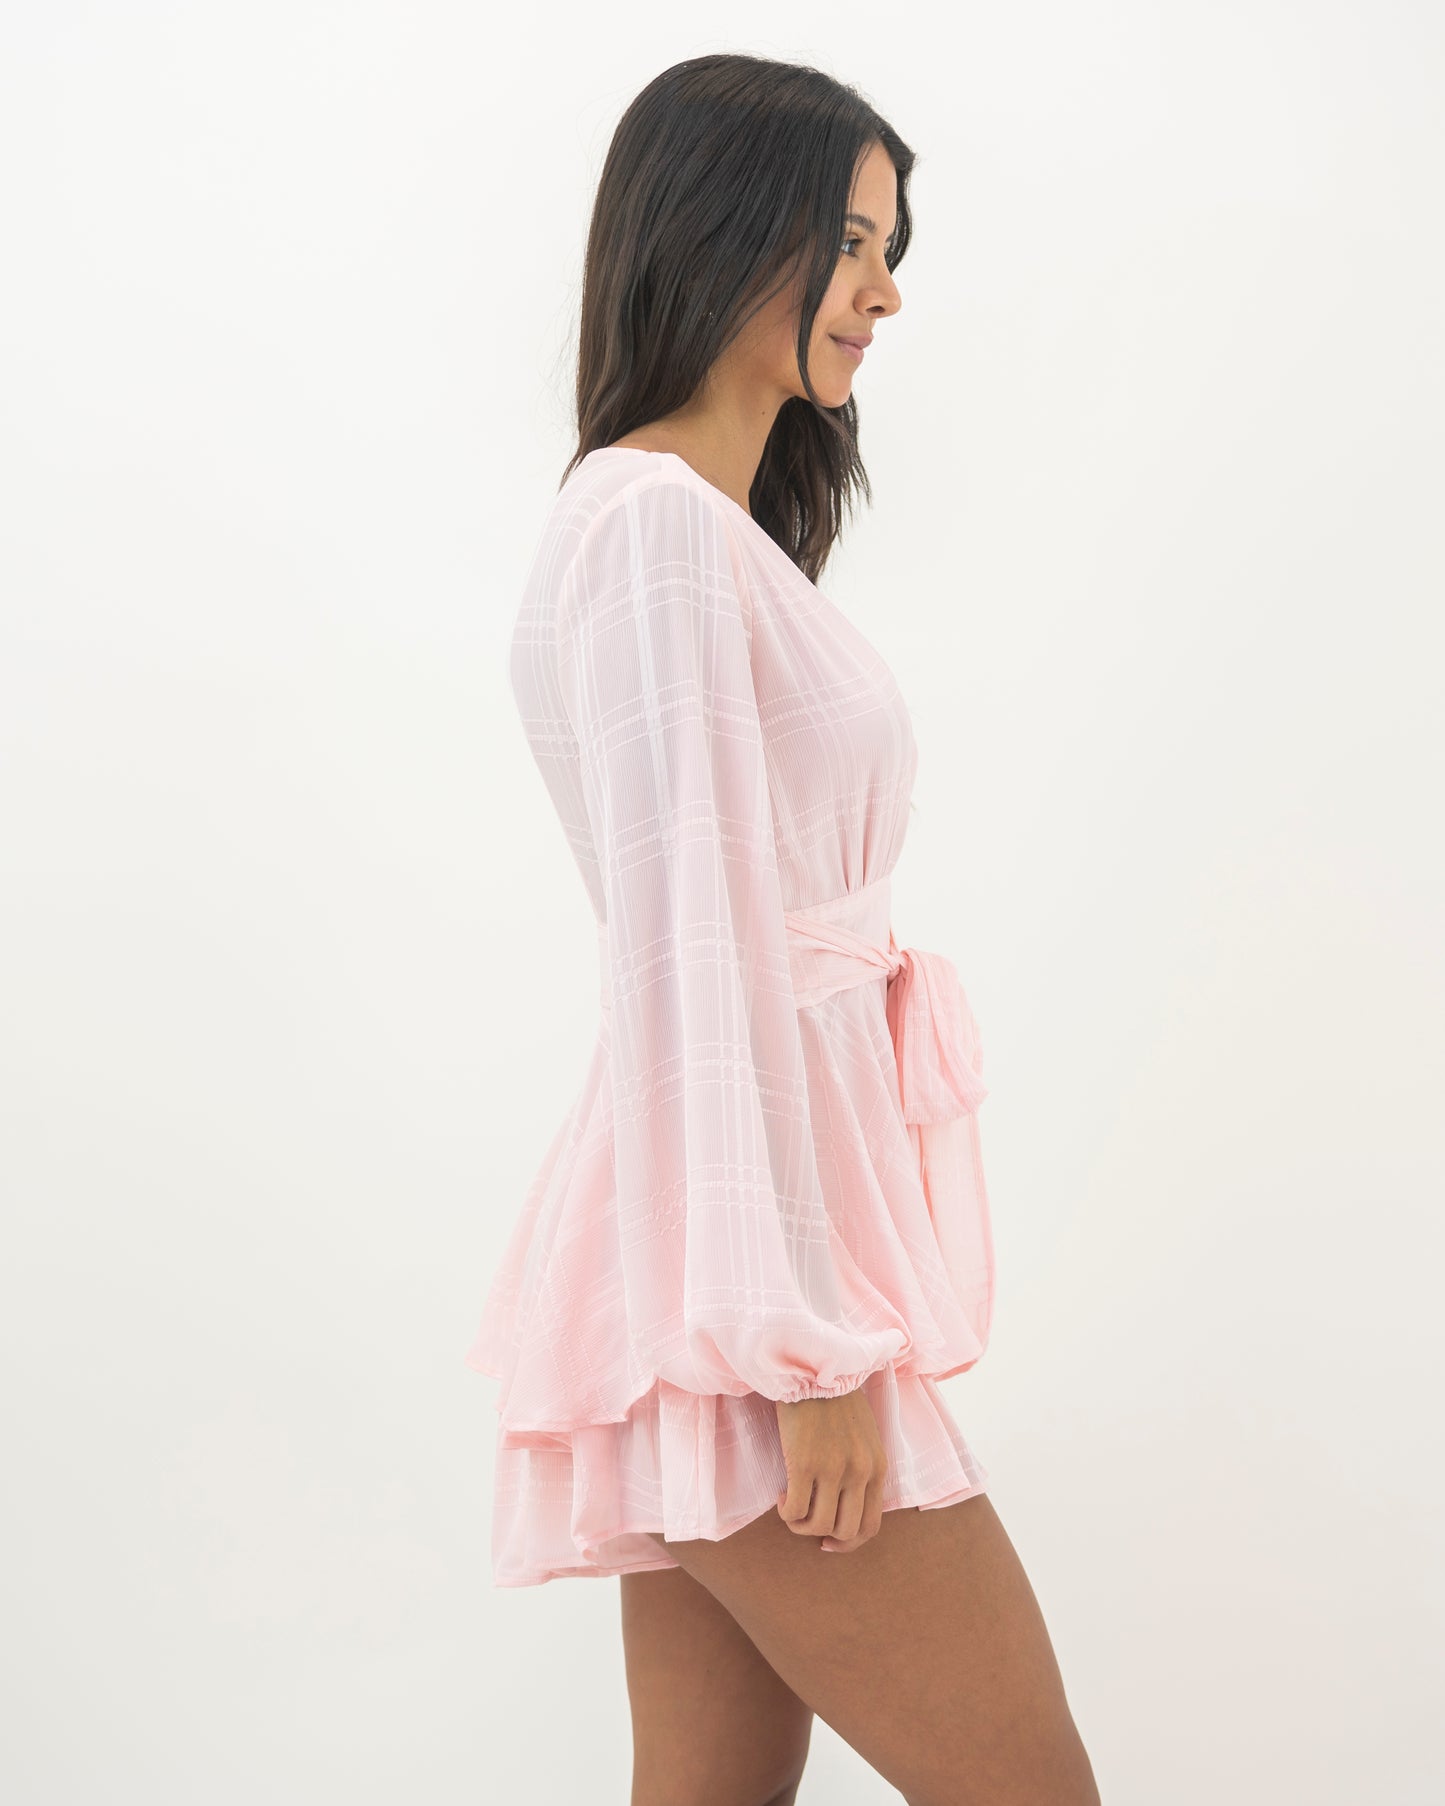 Fashion Light Pink Checkered Ruffle Tie-Up Romper with Bell Sleeve